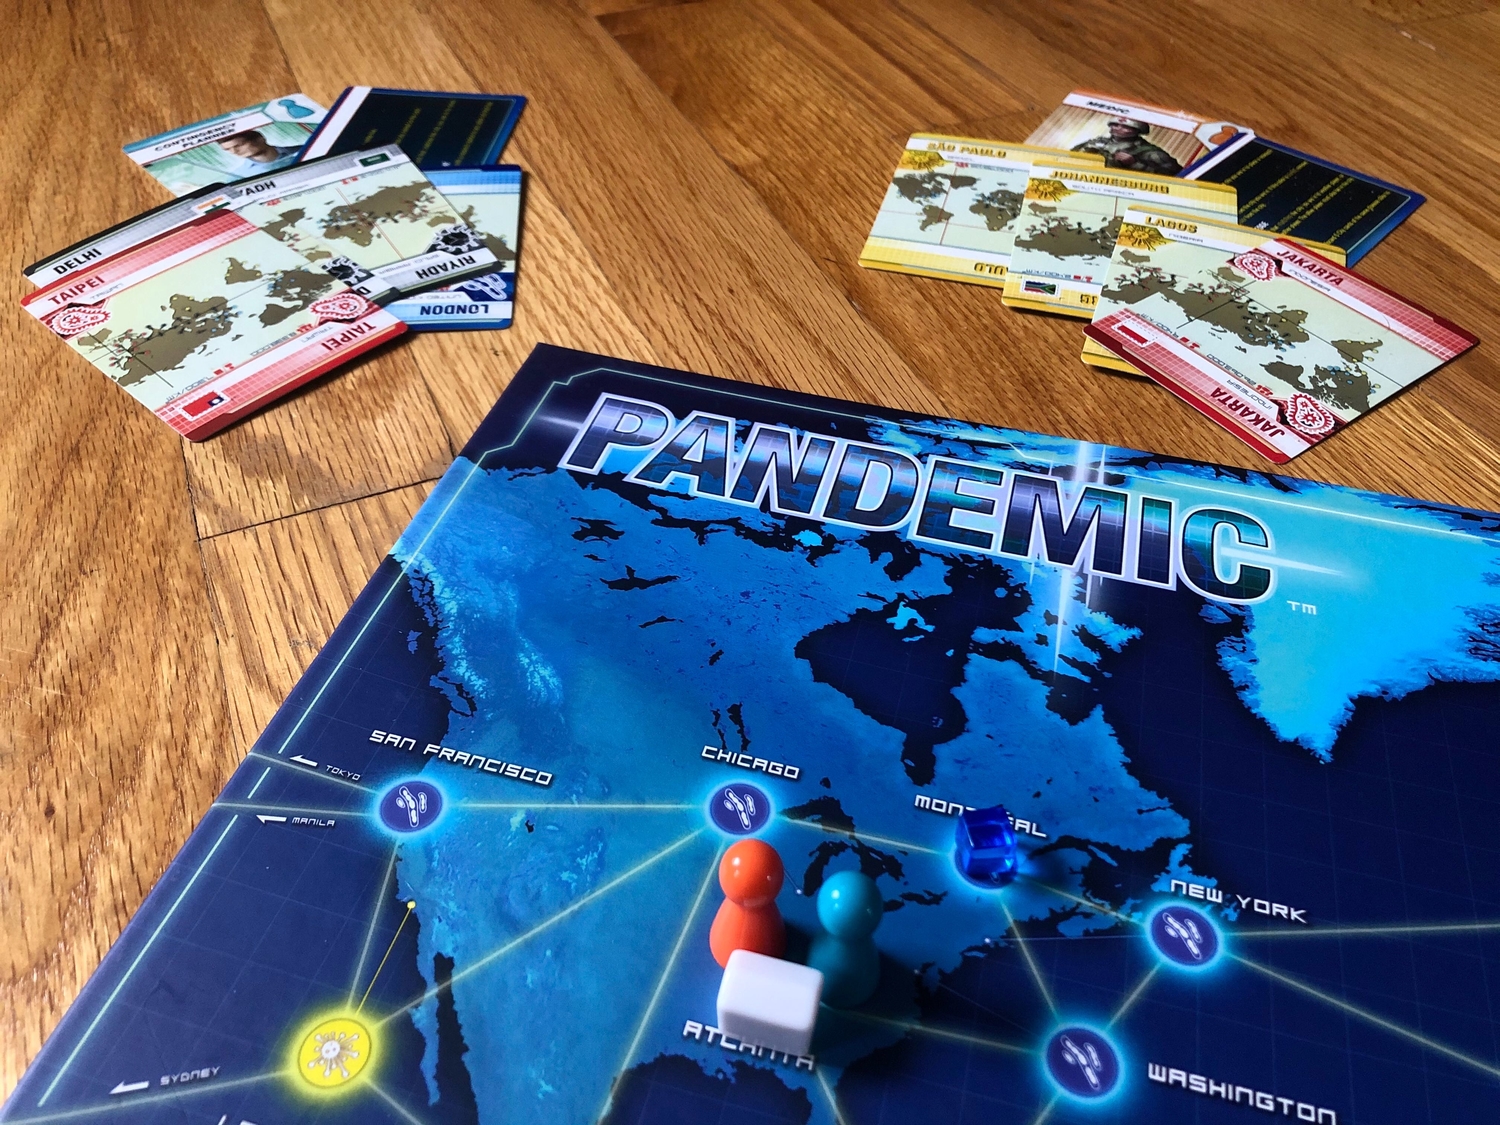 Two-player games to keep friendships intact